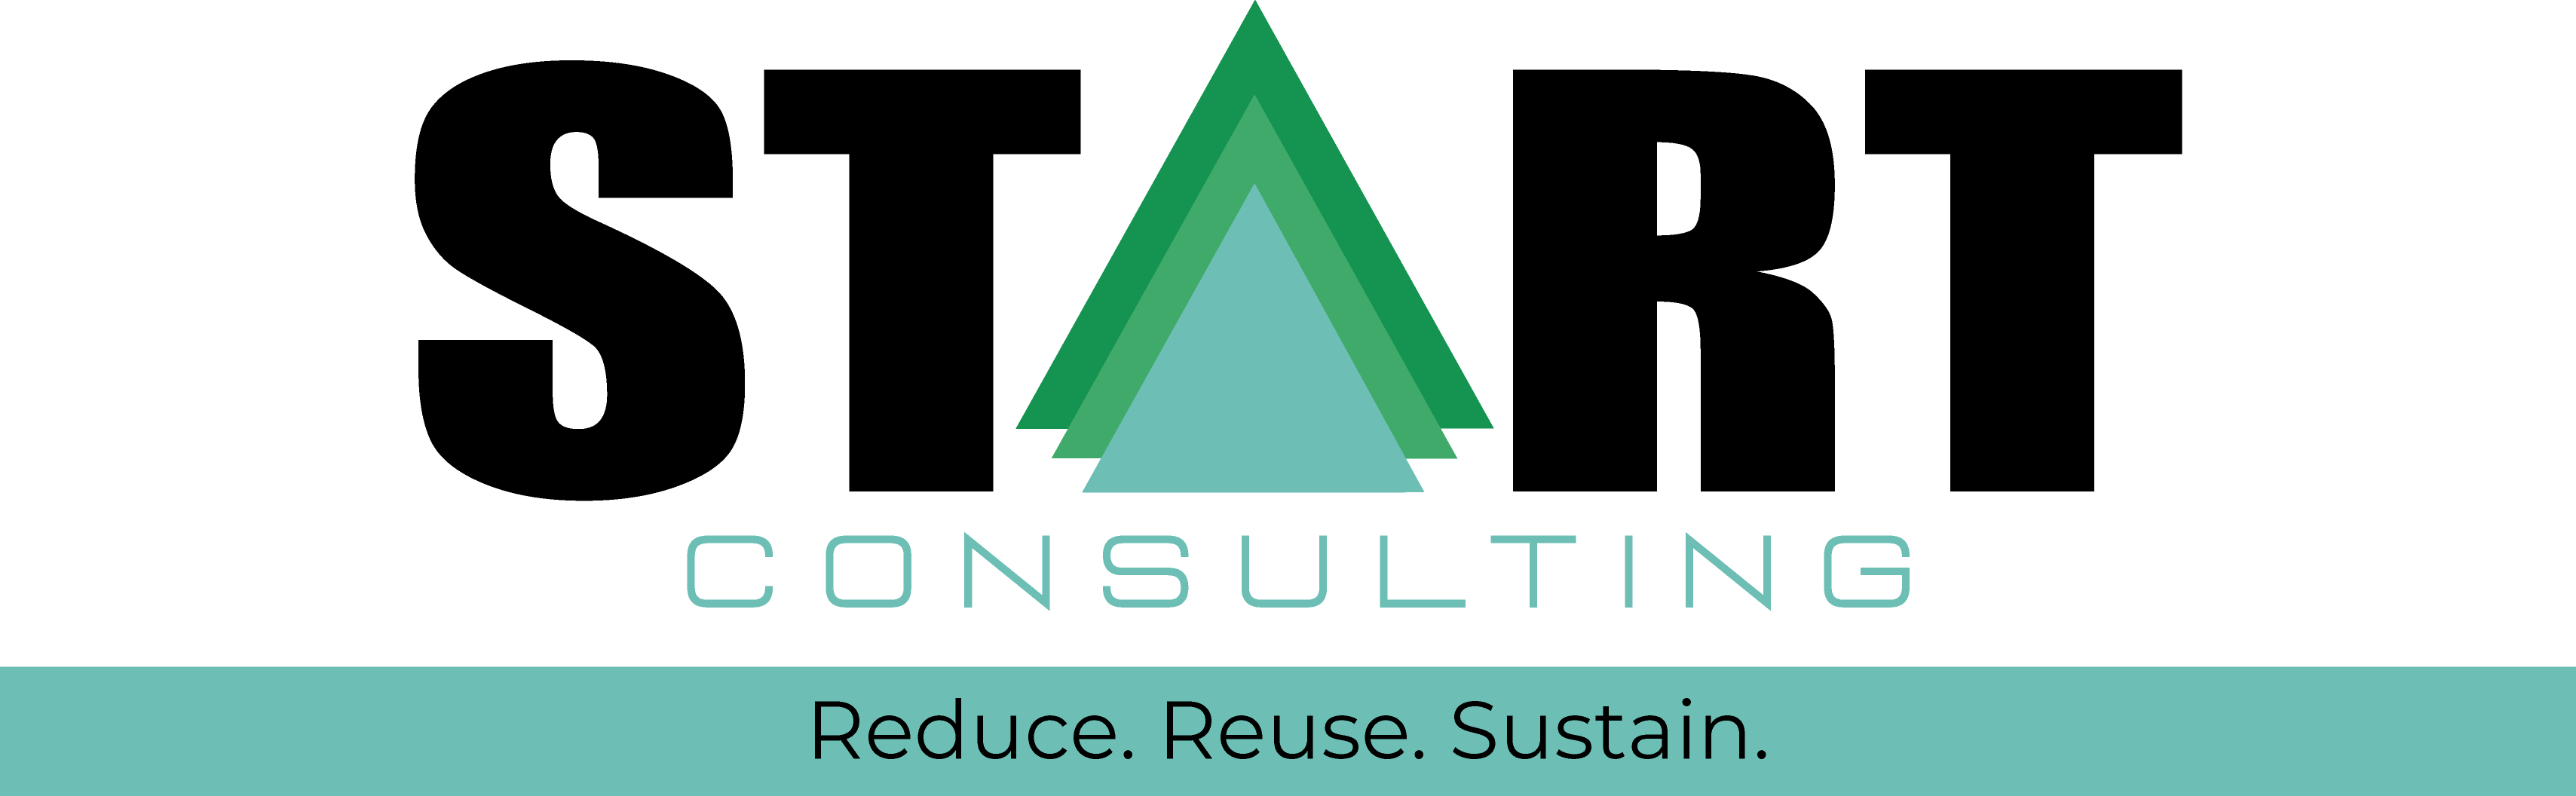 Start Consulting Group Logo